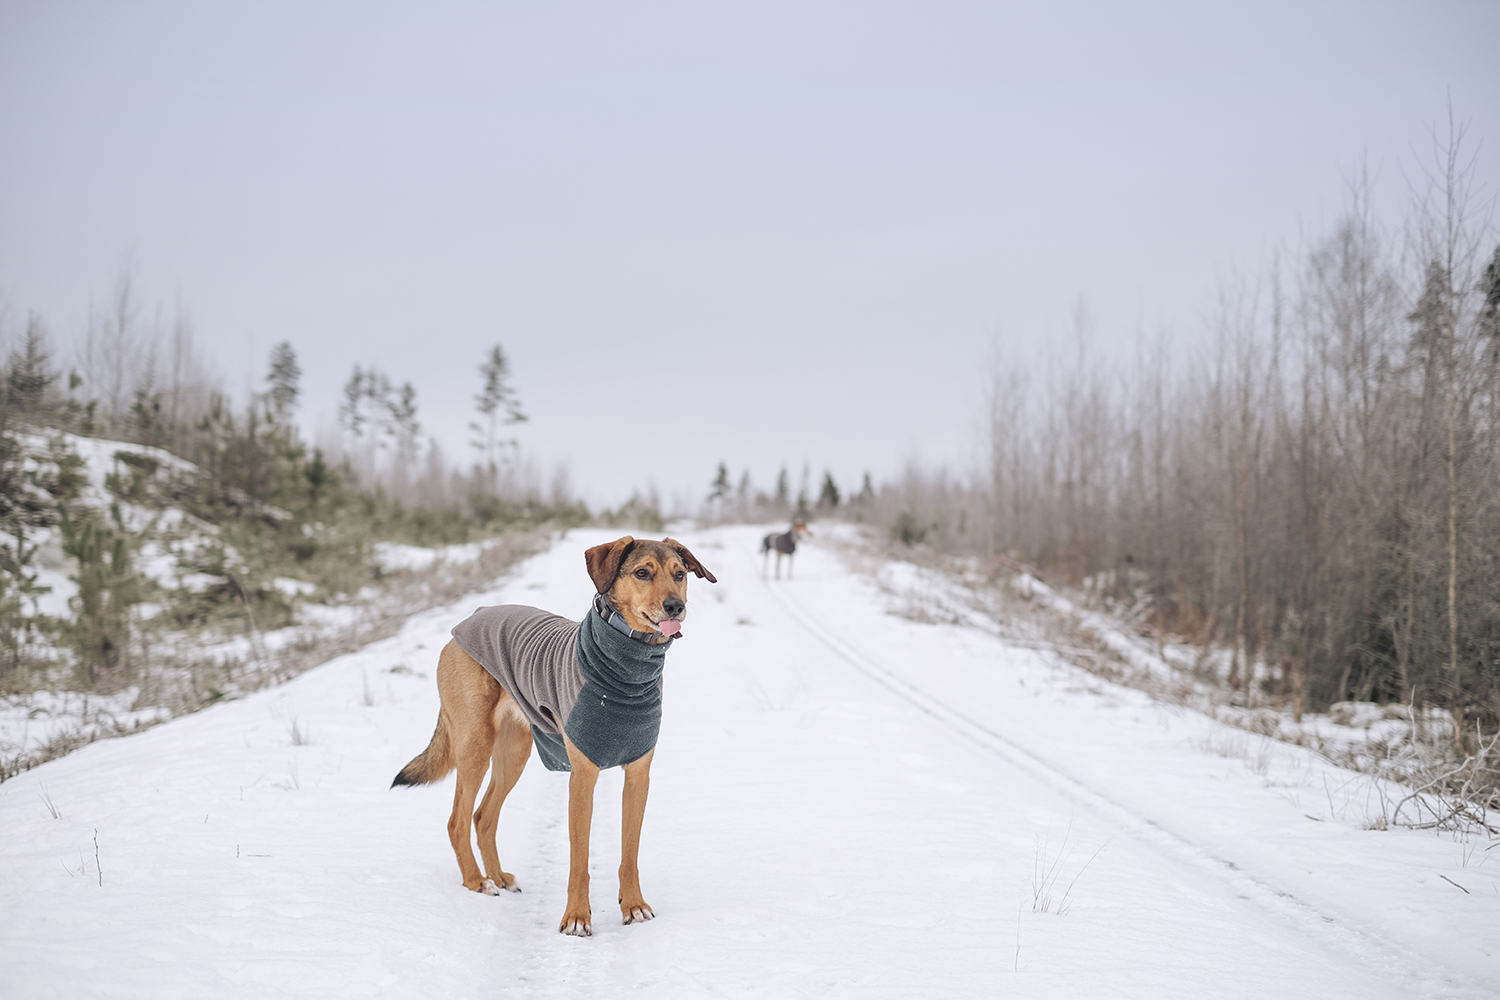 #TongueOuttuesday (05), dog photography Sweden, mutts of instagram, dogs in Sweden, nordic winter, Fujifilm xt4 mirrorless photography, www.DOGvision.eu